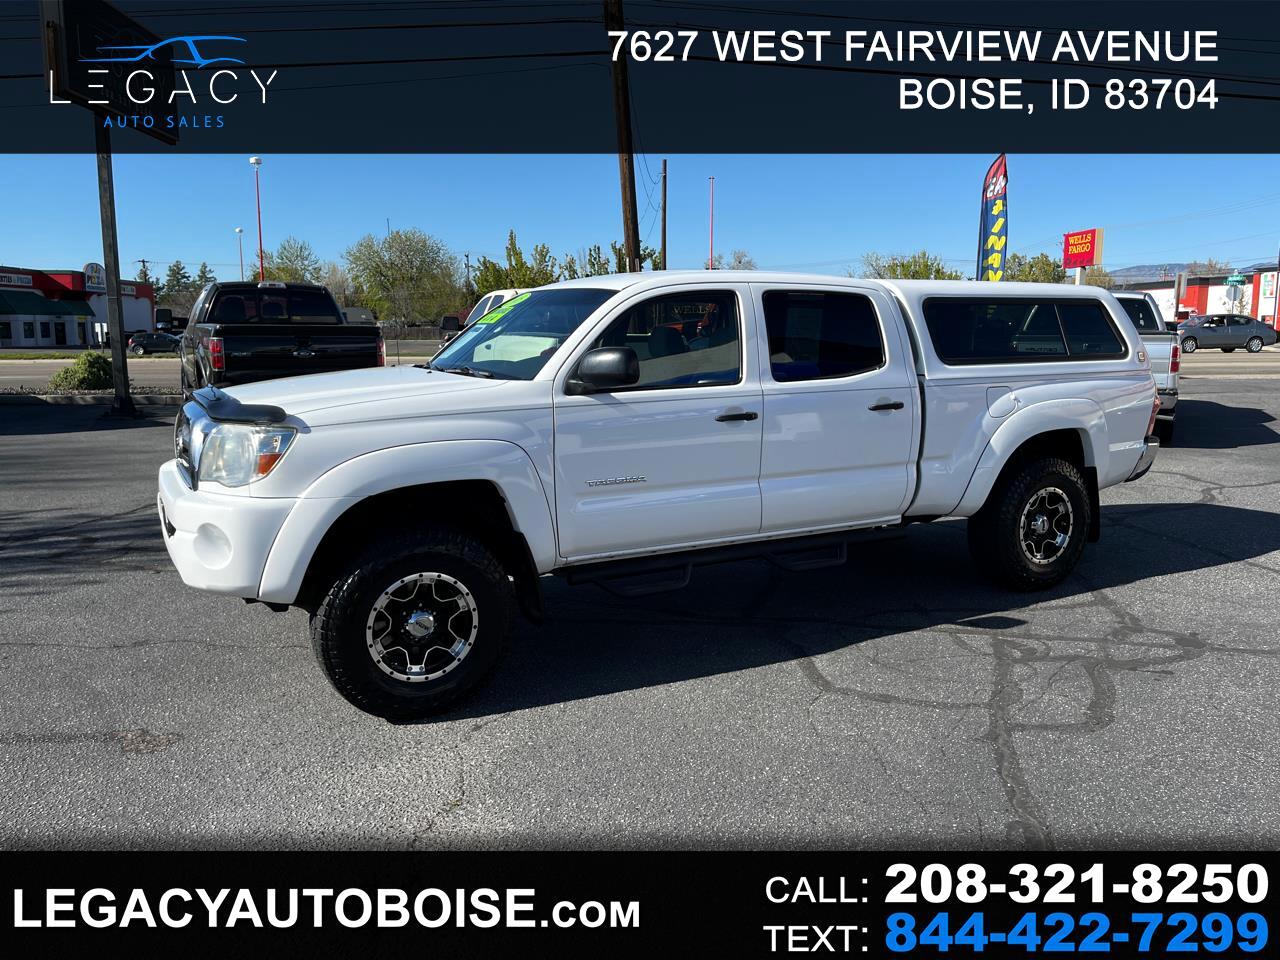 2005 Toyota Tacoma Double Cab Long Bed V6 Automatic 4WD